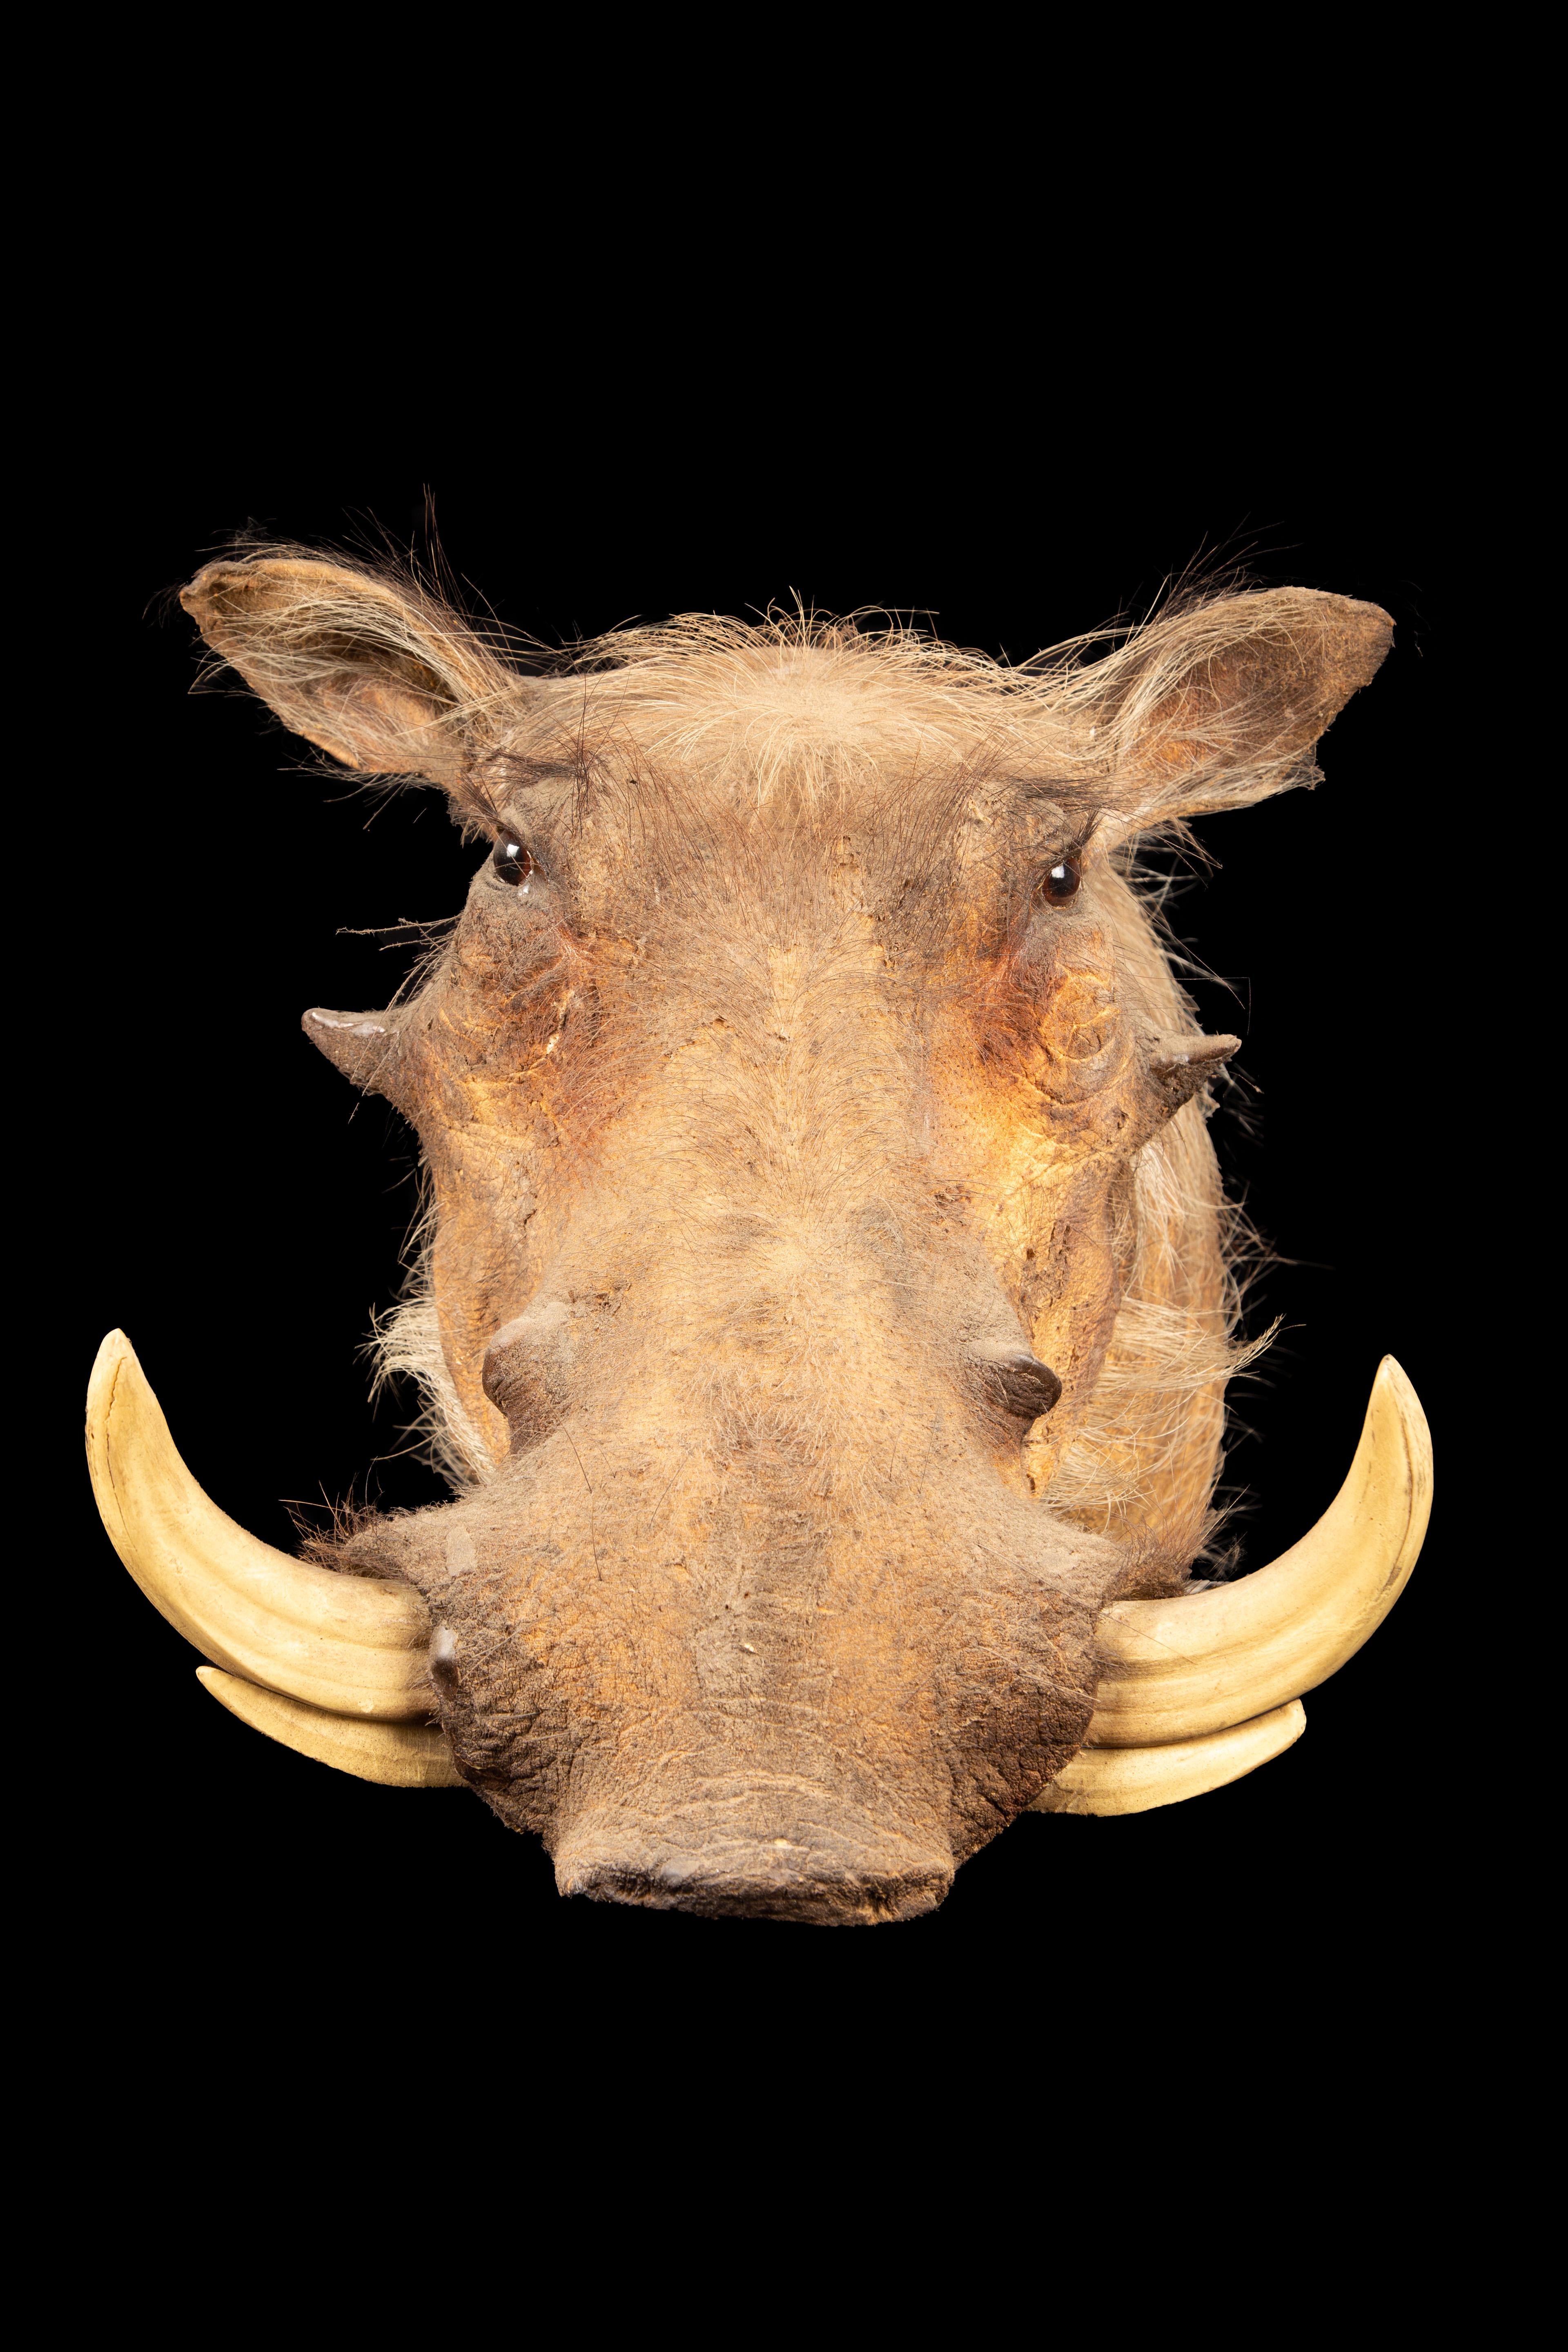 This shoulder mount taxidermy African warthog is a stunning piece of craftsmanship that captures the essence of this unique animal. With a height of 19 inches and dimensions of 14